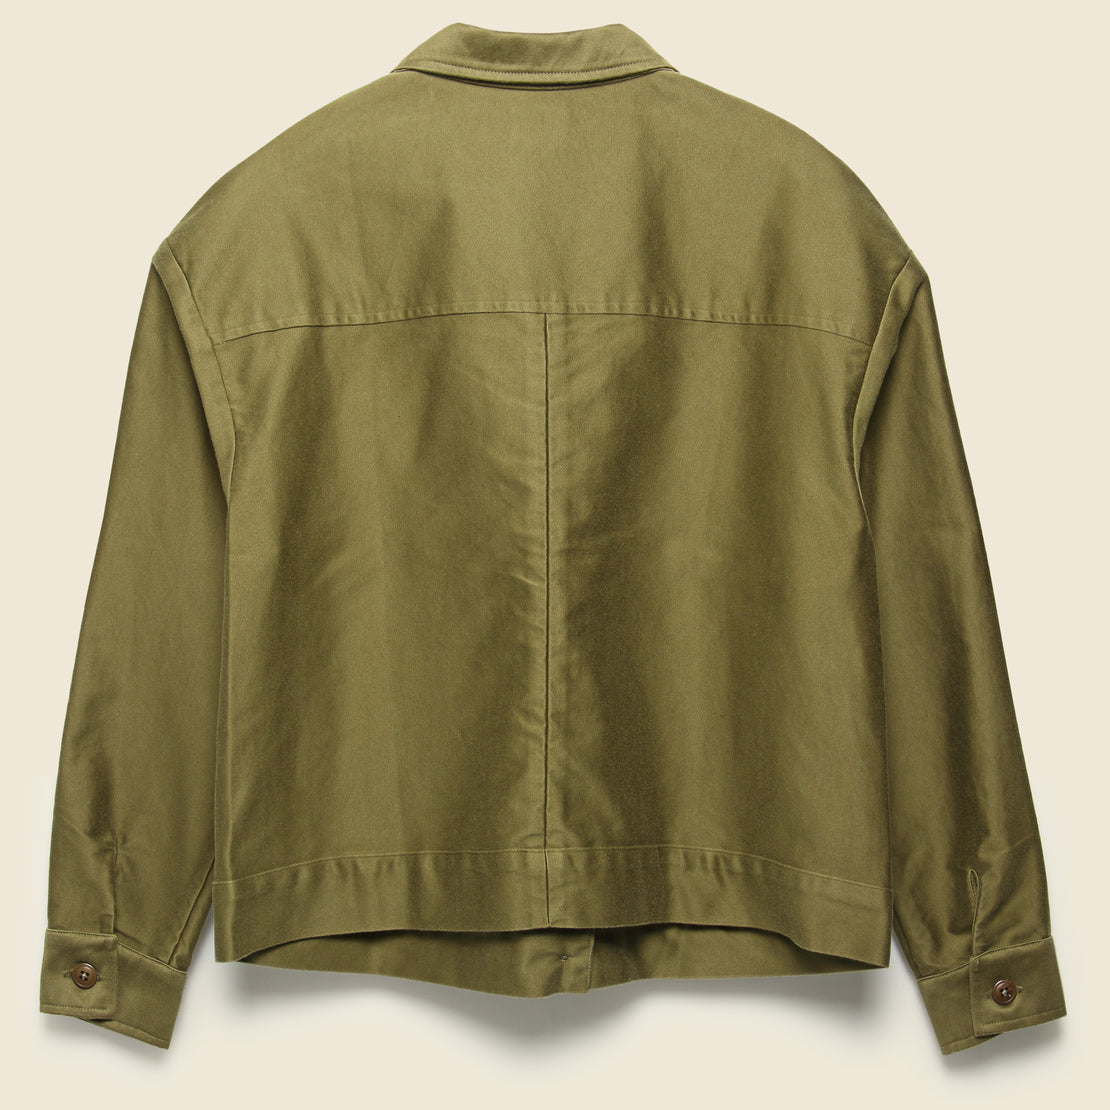 Mora Military Jacket - Olive Moleskin - Esby - STAG Provisions - W - Outerwear - Coat/Jacket